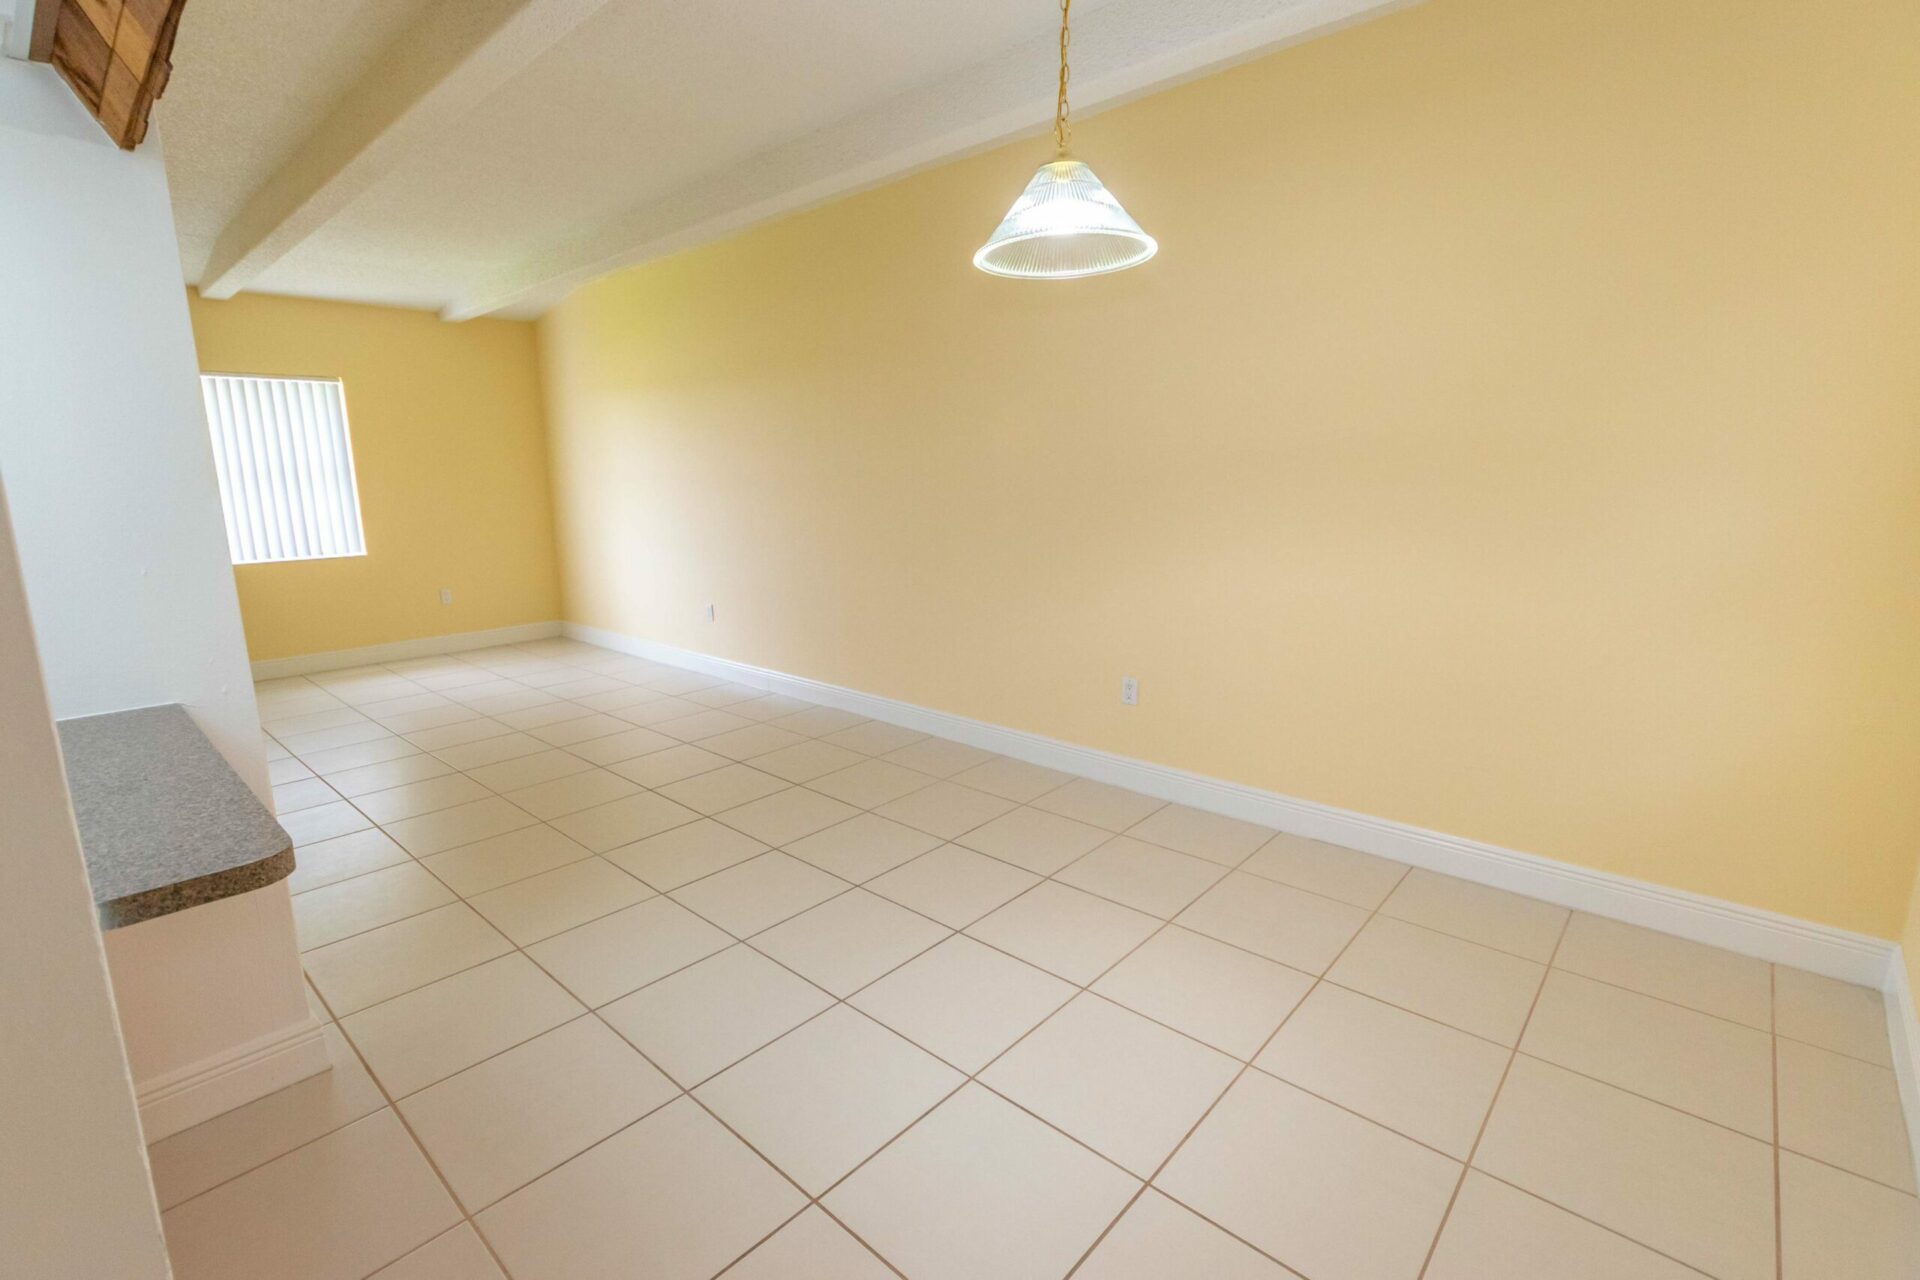 Spacious living and dining area with a hanging light and yellow walls at Green Briar West.